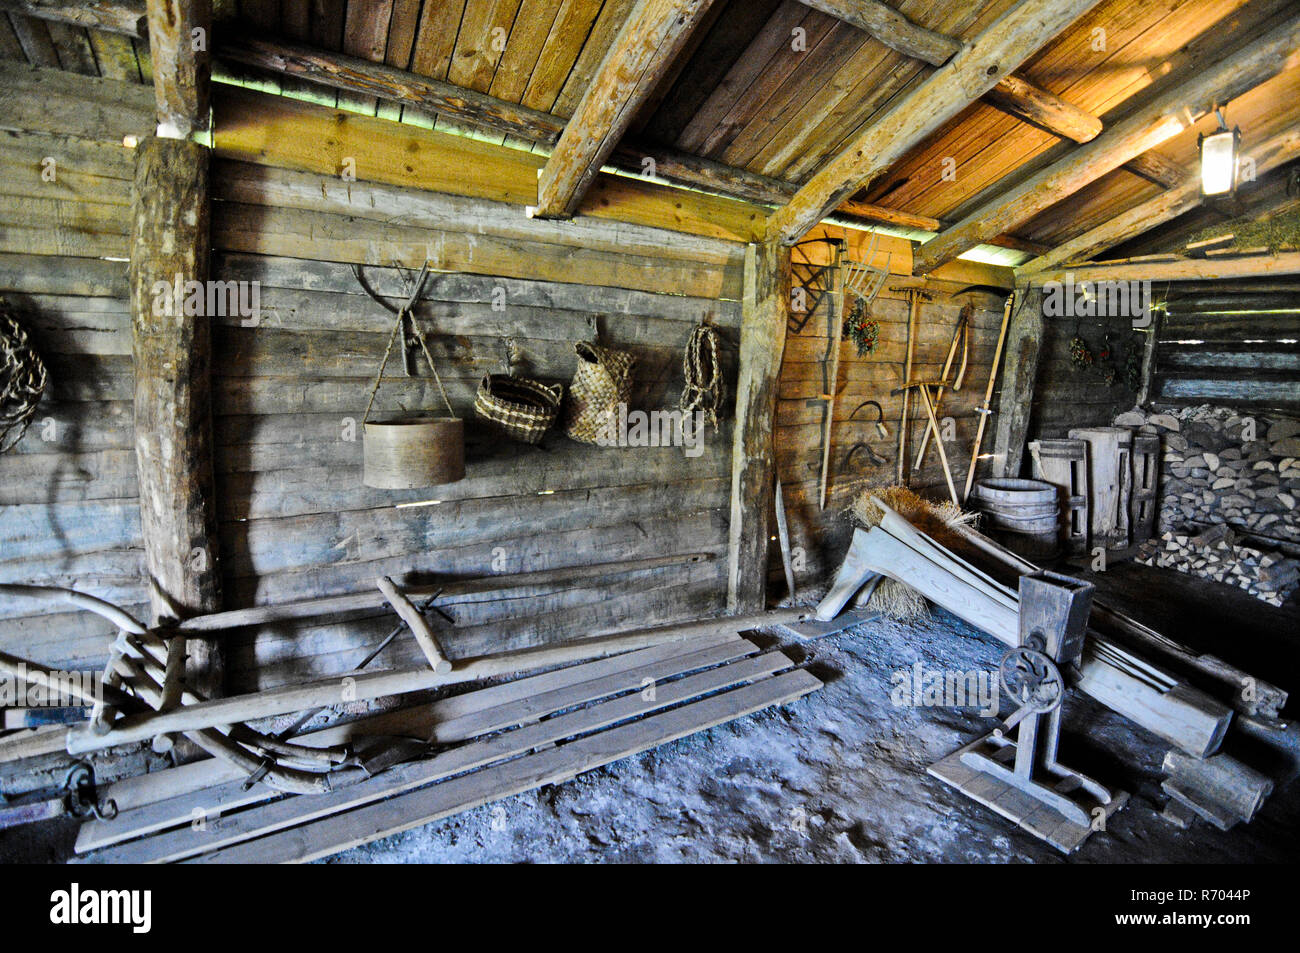 Museum of Wooden Architecture and Peasant Life - Interior of an ancient Russian wooden house. Suzdal Stock Photo